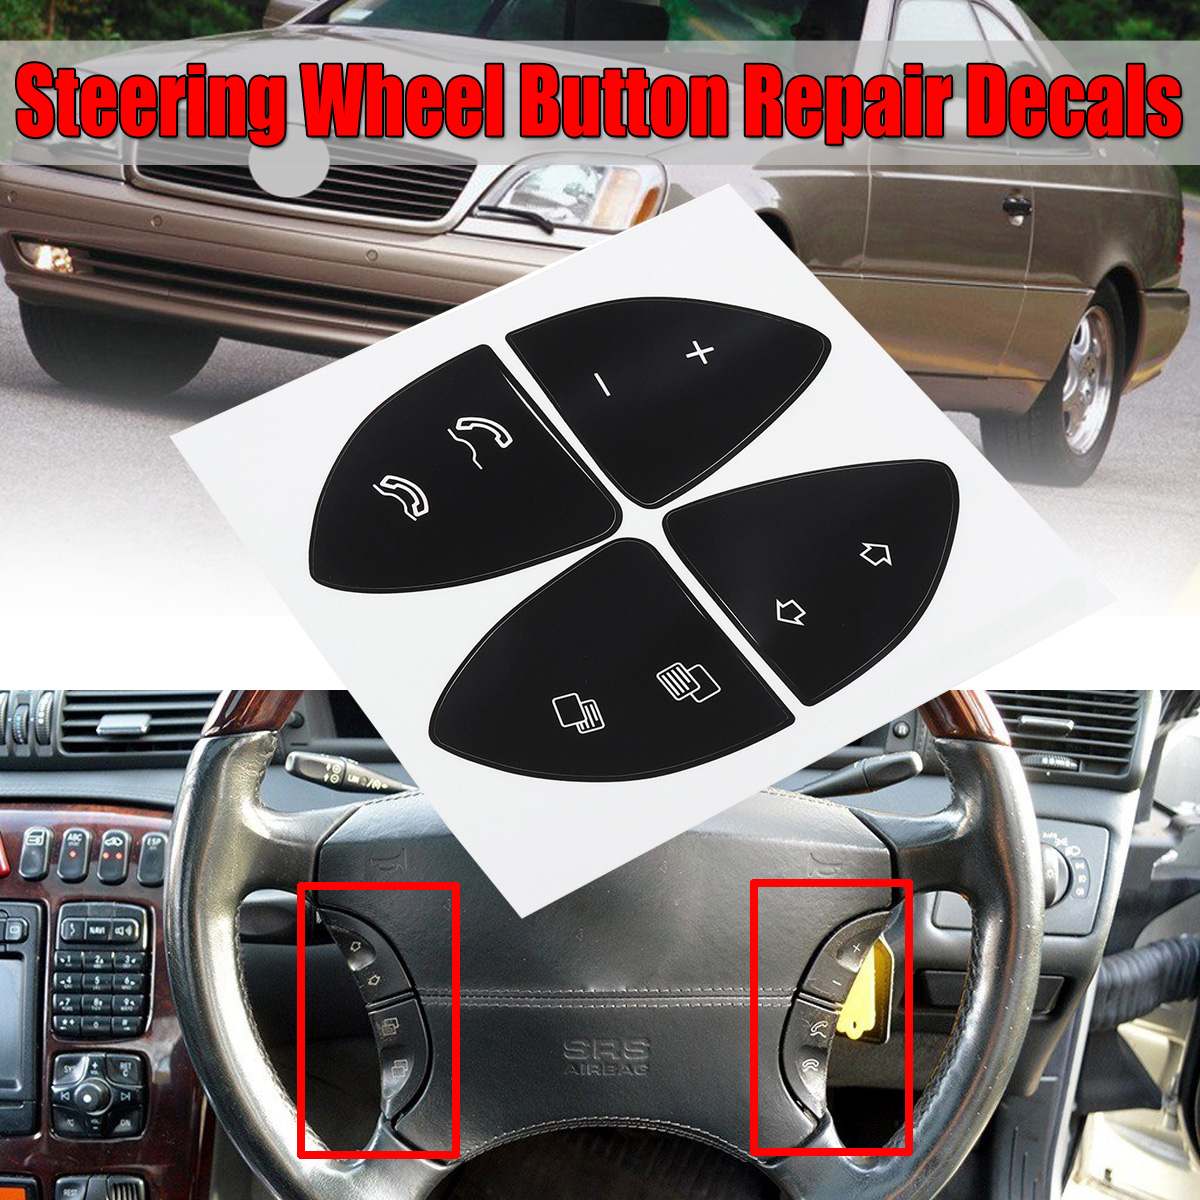 

Car Button Repair Sticker Steering Wheel Button Repair Decals Stickers Kit For MERCEDES For BENZ W220 S430 S500 S600 CL500 CL600, As described